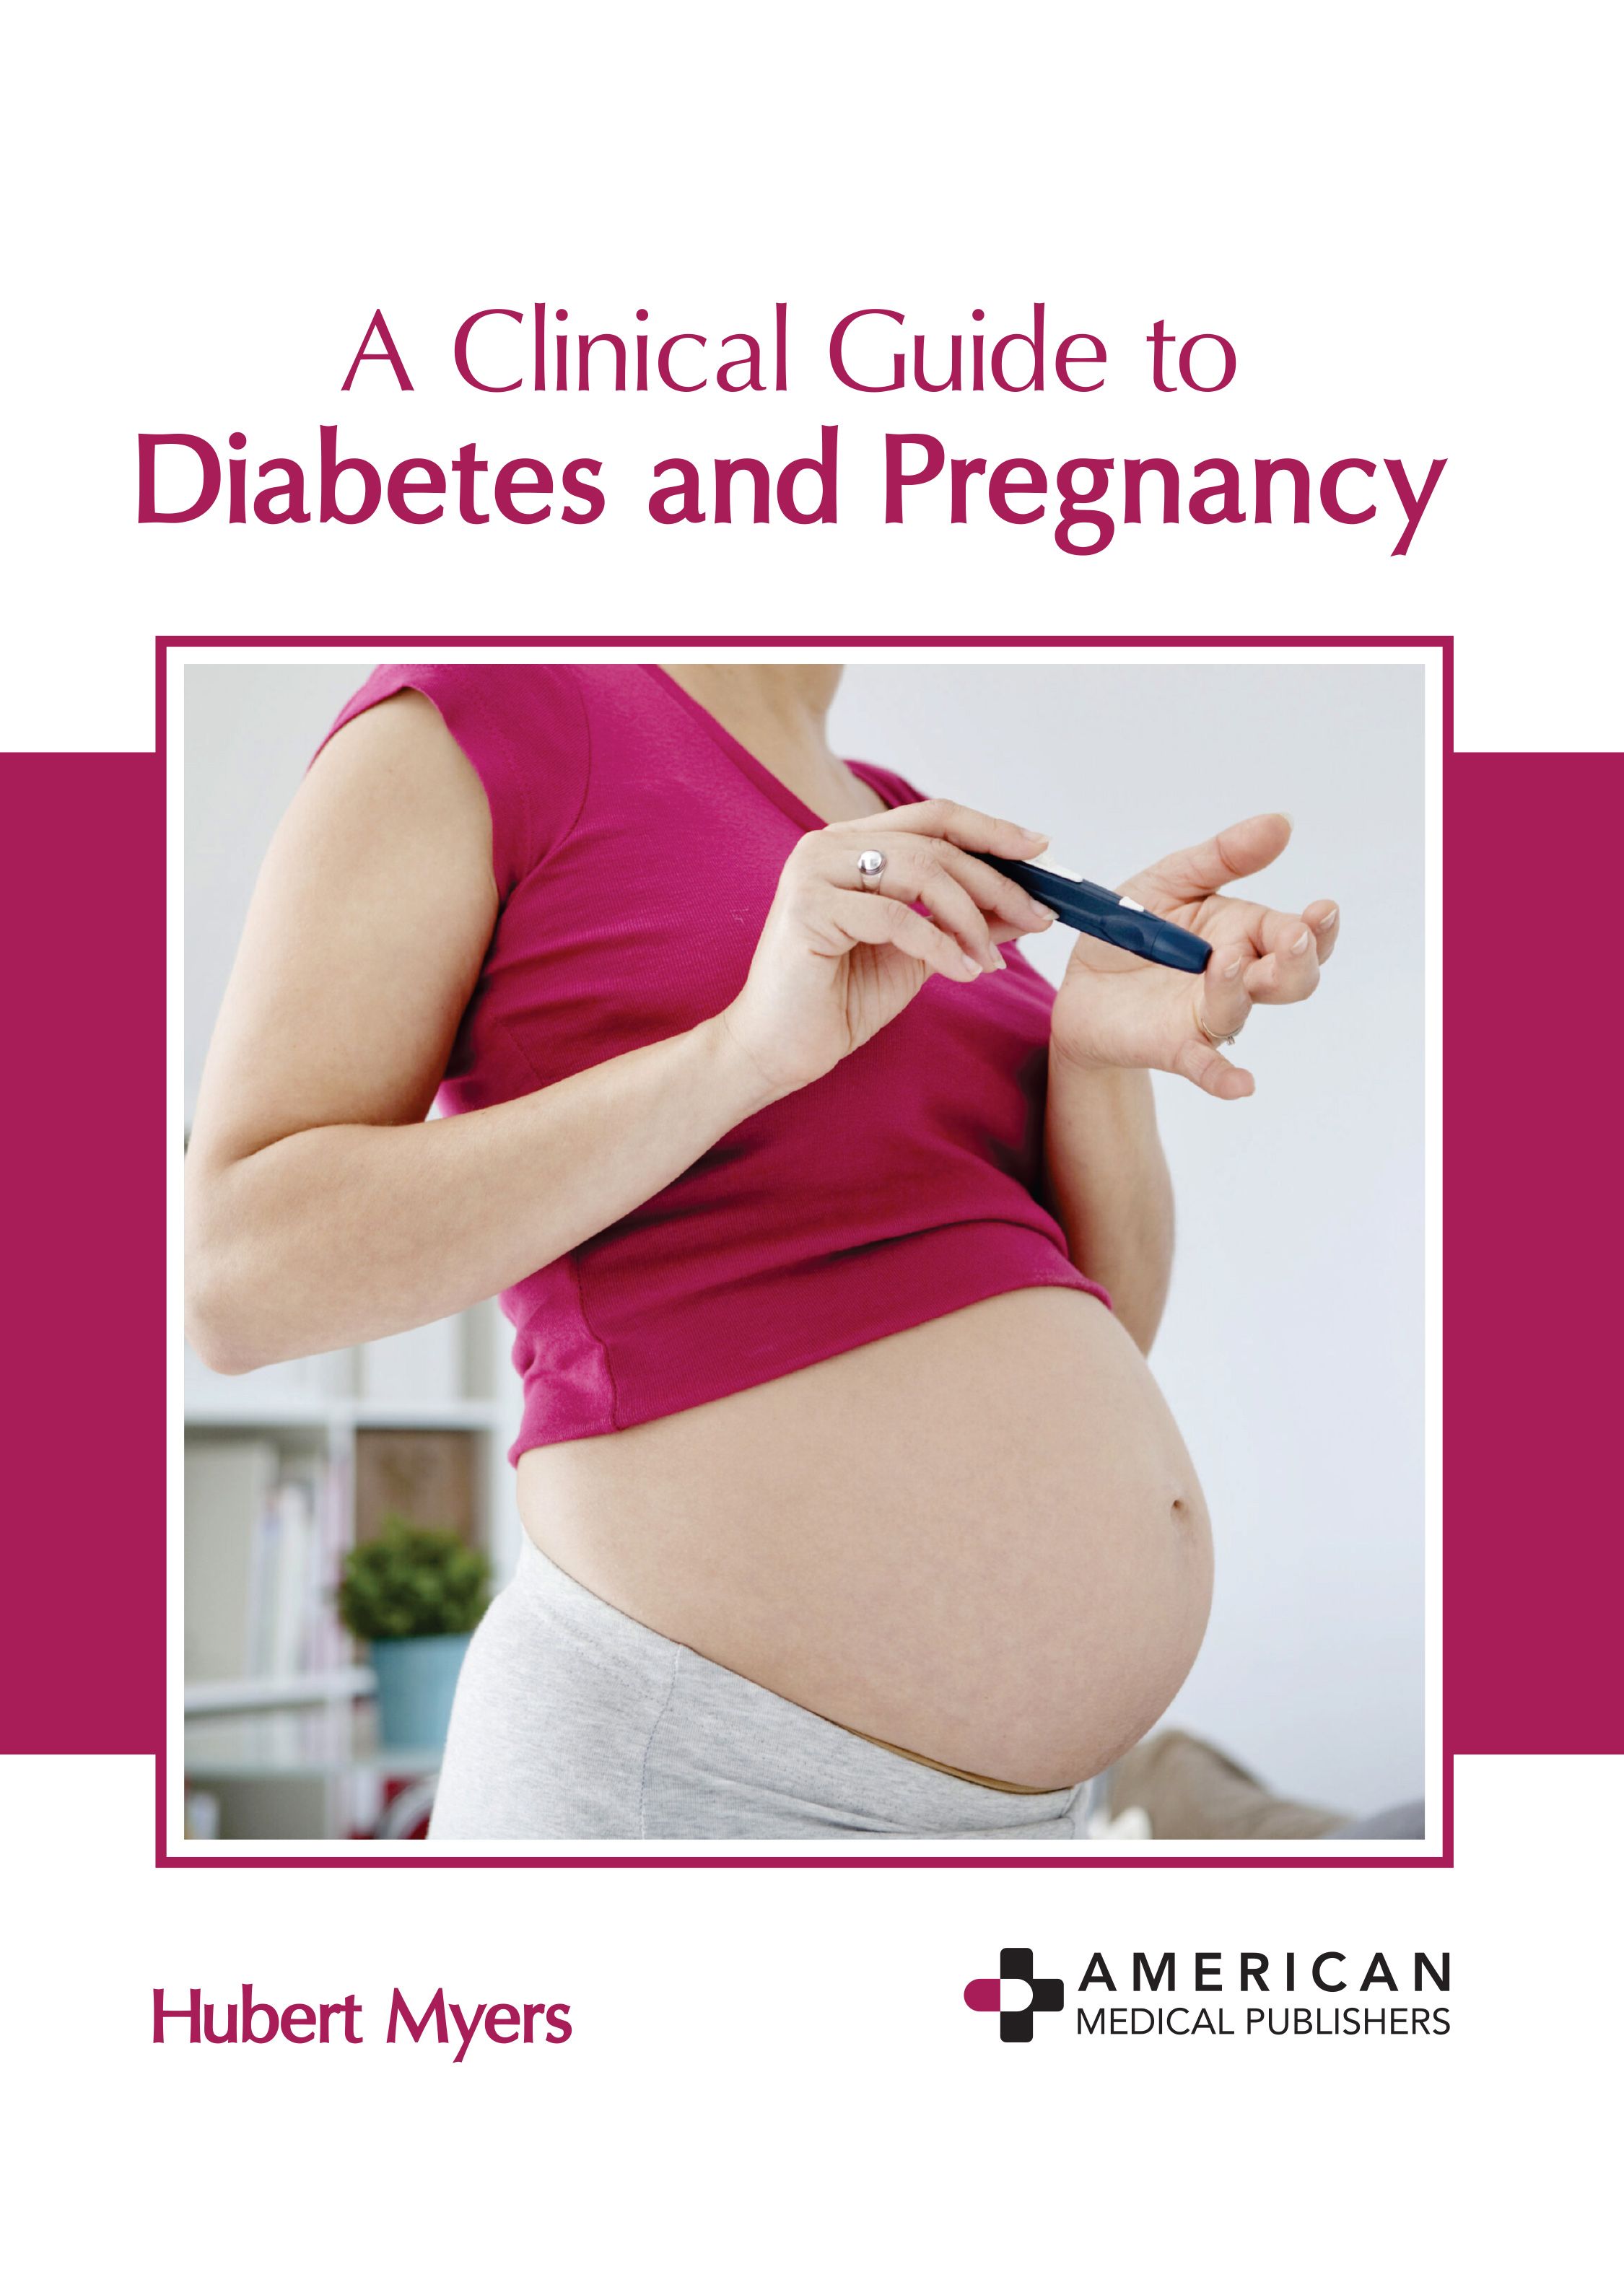 A CLINICAL GUIDE TO DIABETES AND PREGNANCY